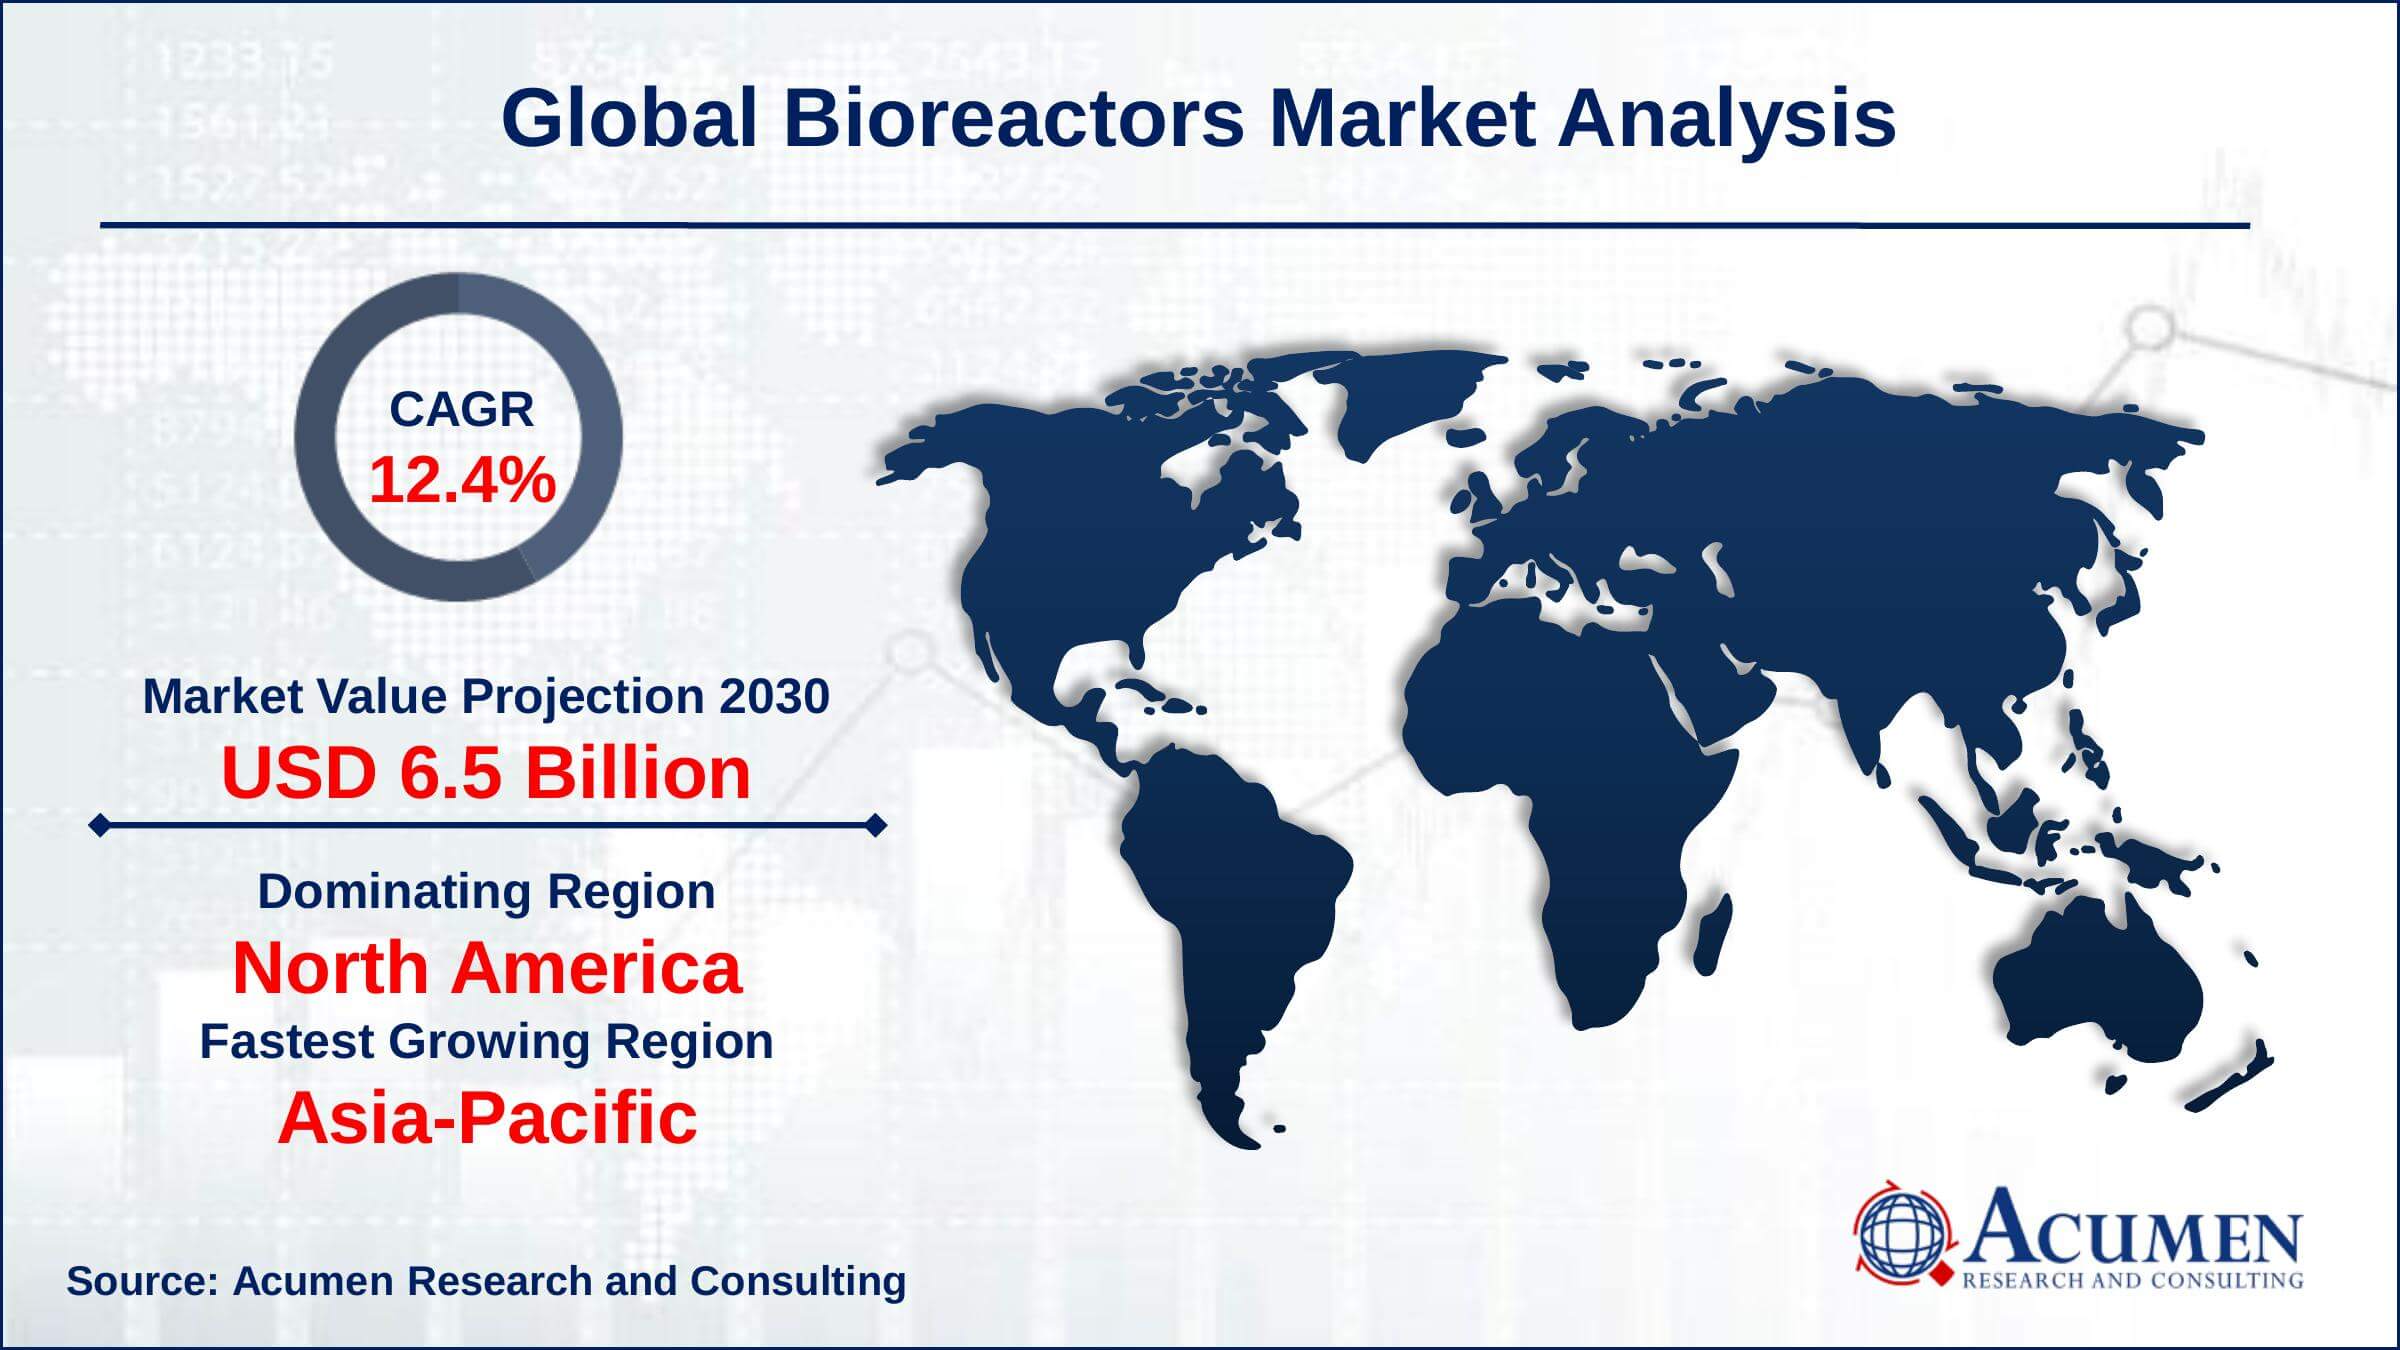 Global bioreactors market revenue is projected to reach USD 6.5 Billion by 2030 with a CAGR of 12.4% from 2022 to 2030